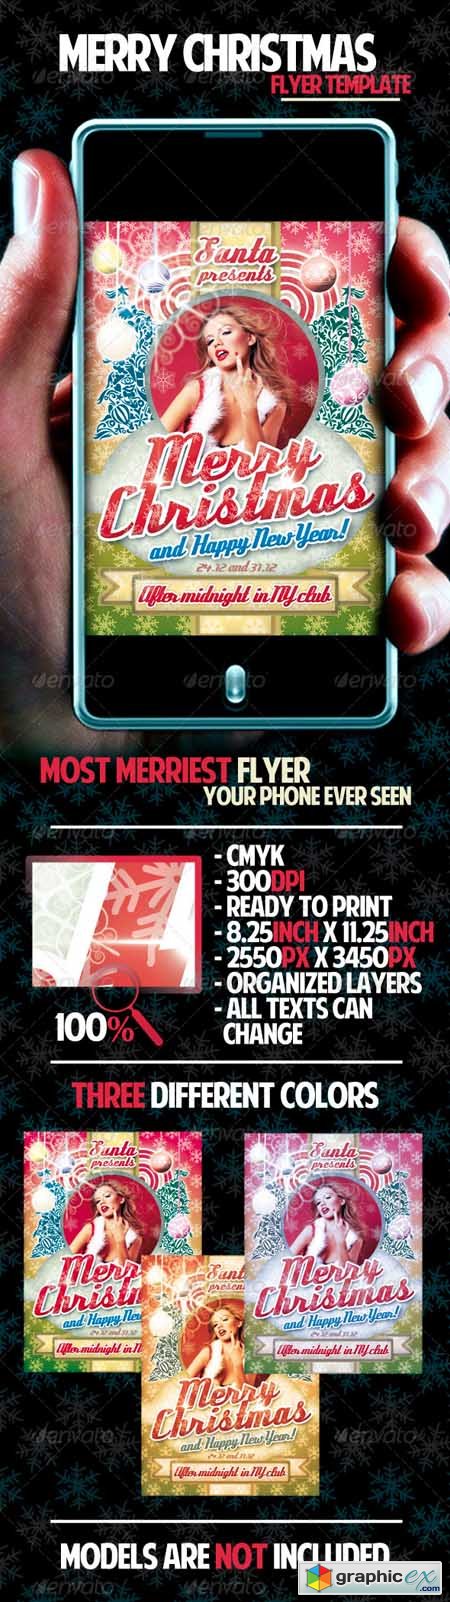 Merry Christmas Flyer Template 837494